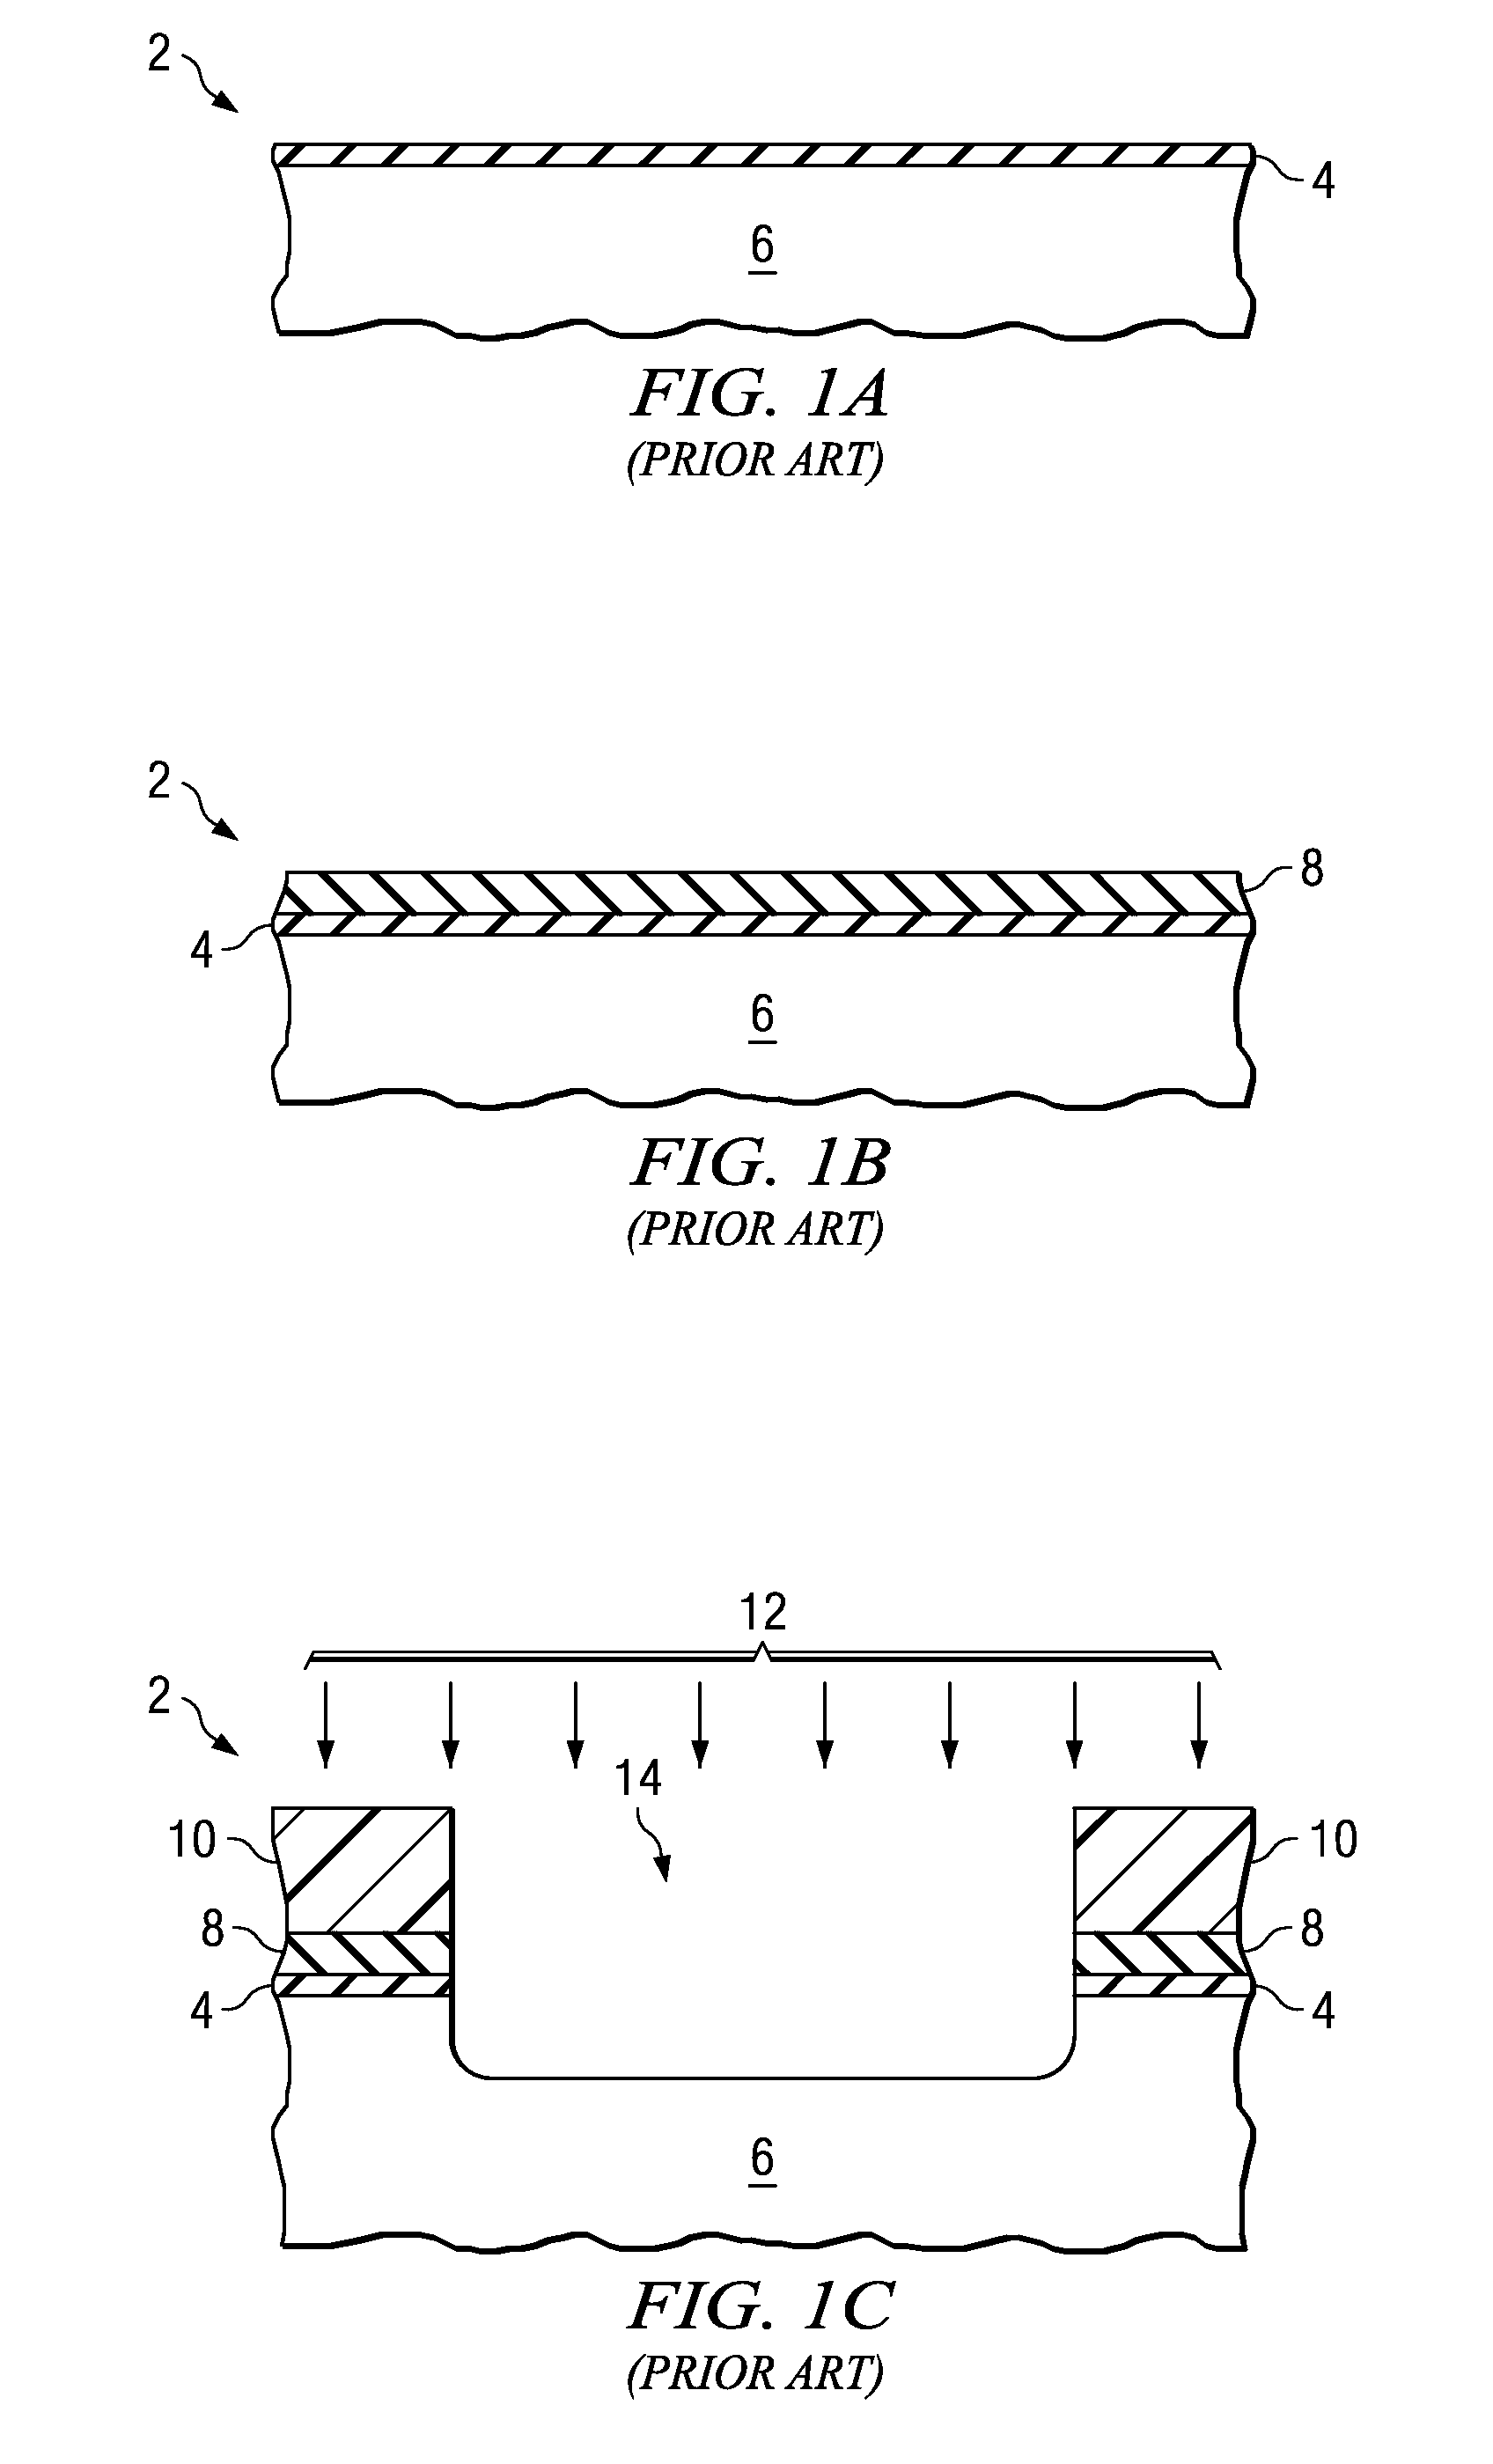 Highly selective liners for semiconductor fabrication